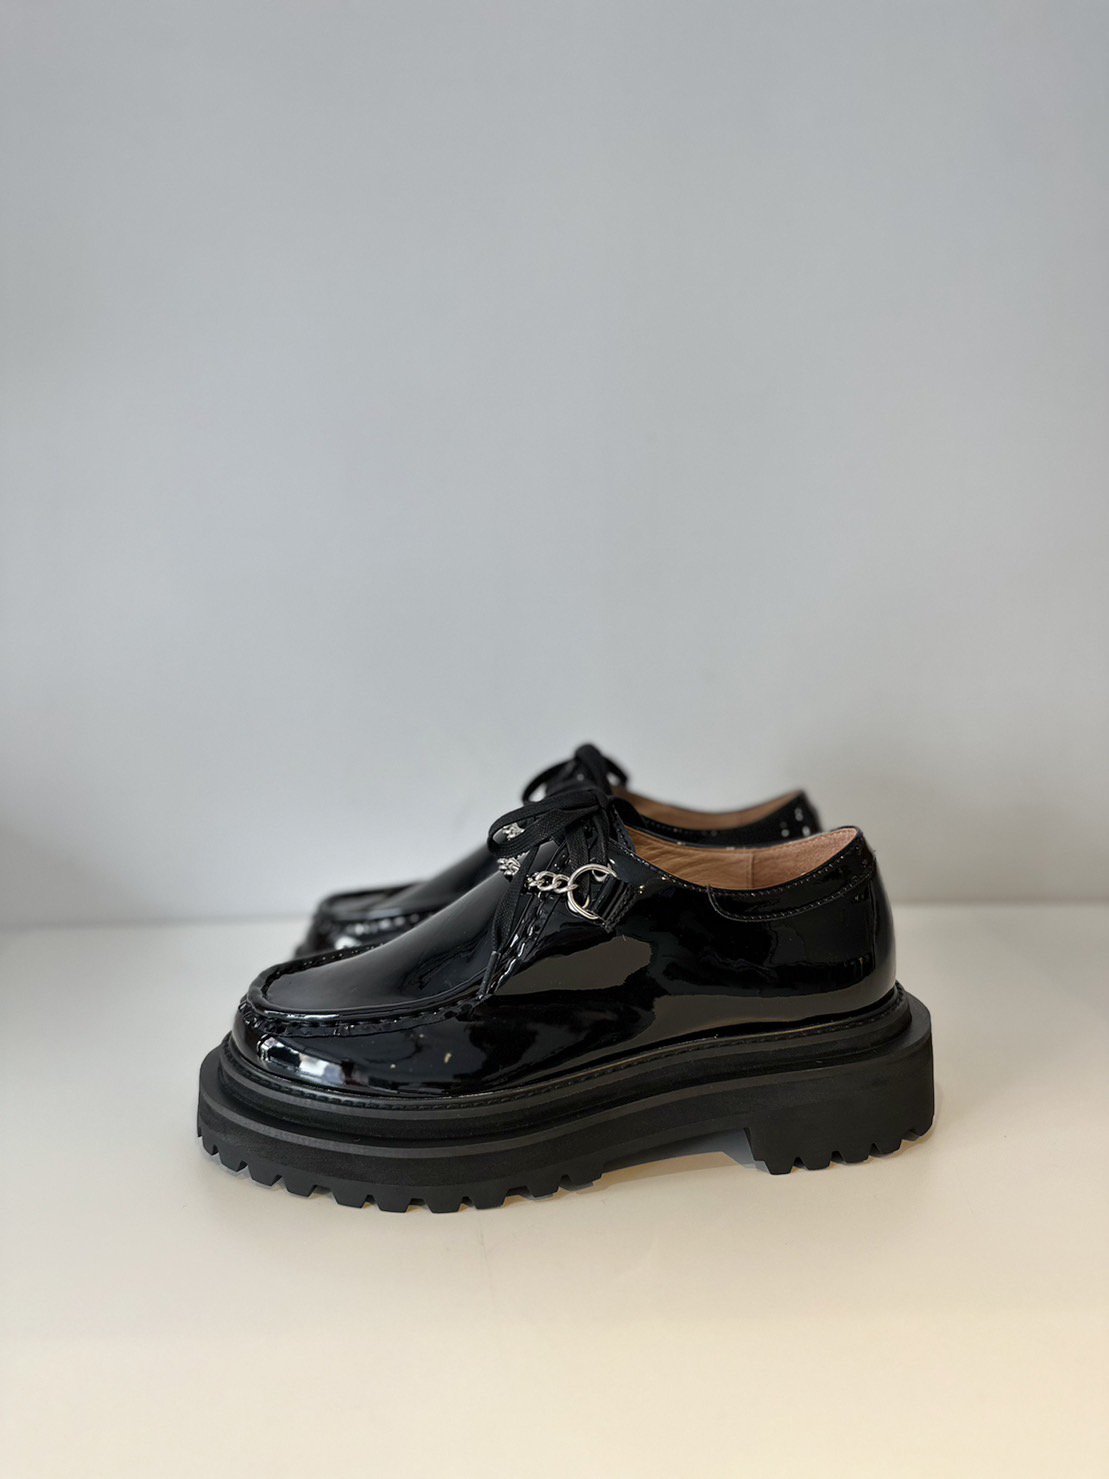 DAIRIKU<br />Patent Derby Shoes / Black<img class='new_mark_img2' src='https://img.shop-pro.jp/img/new/icons14.gif' style='border:none;display:inline;margin:0px;padding:0px;width:auto;' />